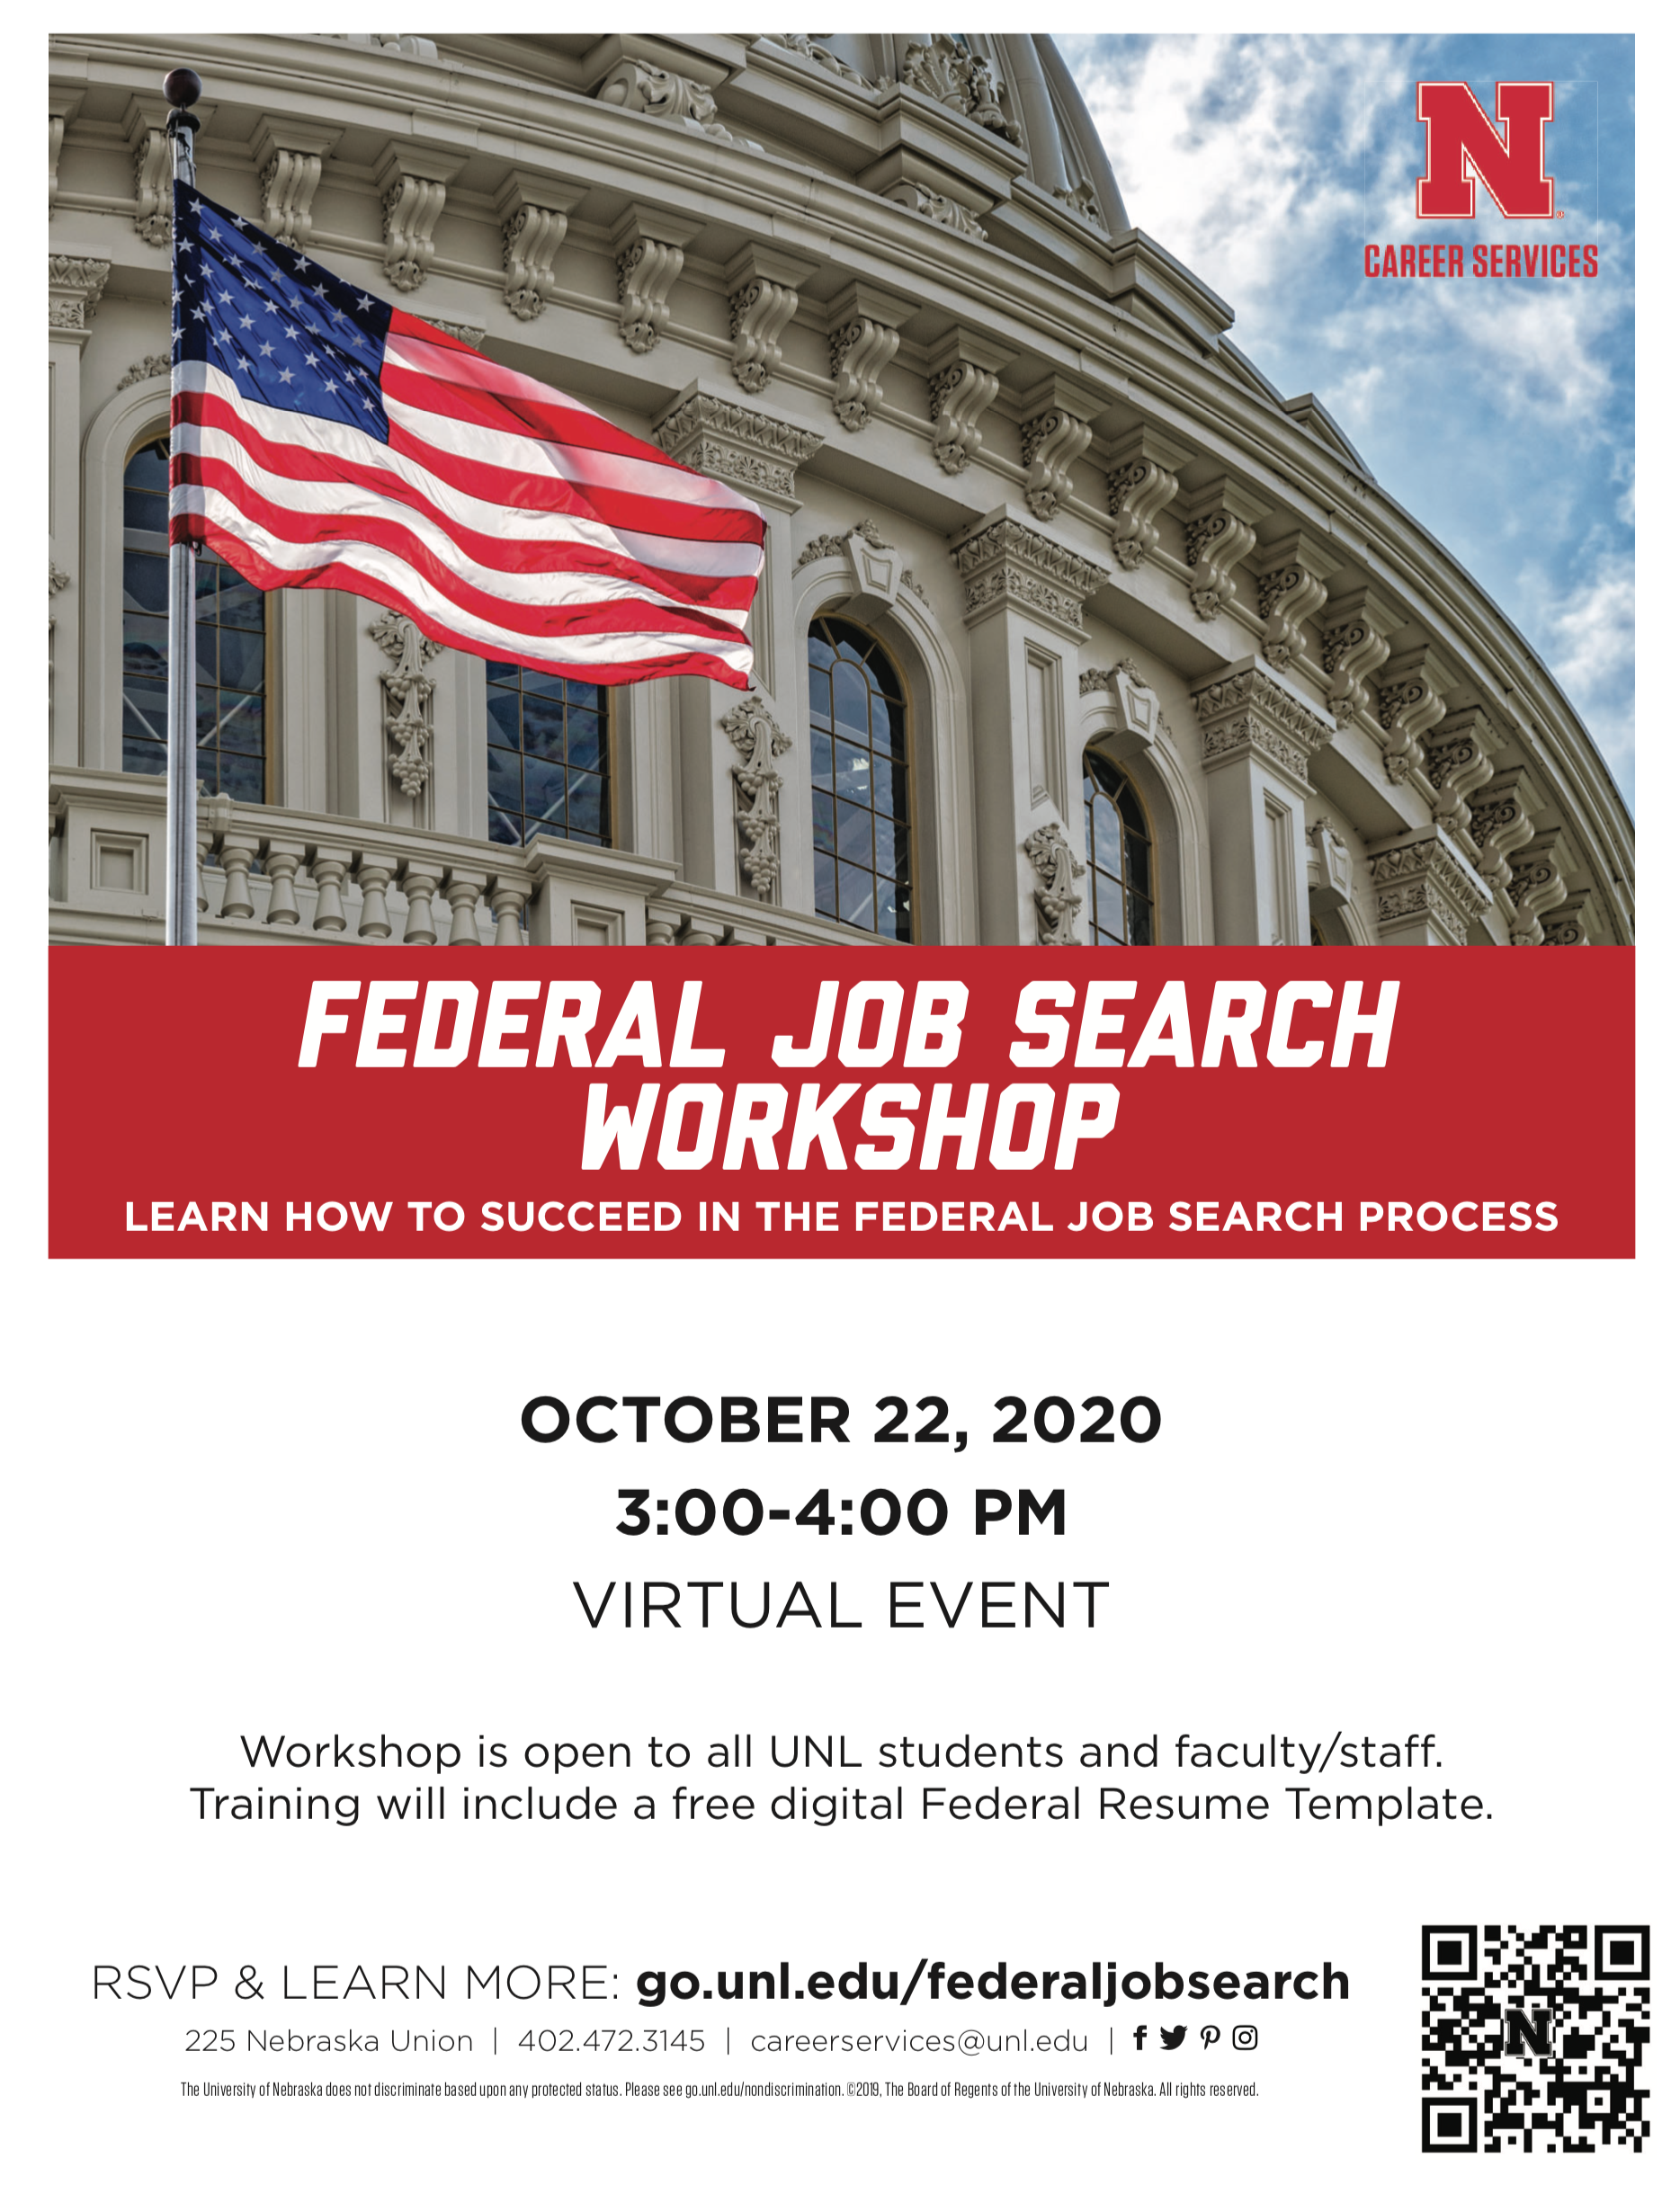 Oct. 22 Federal government job search open to all Announce